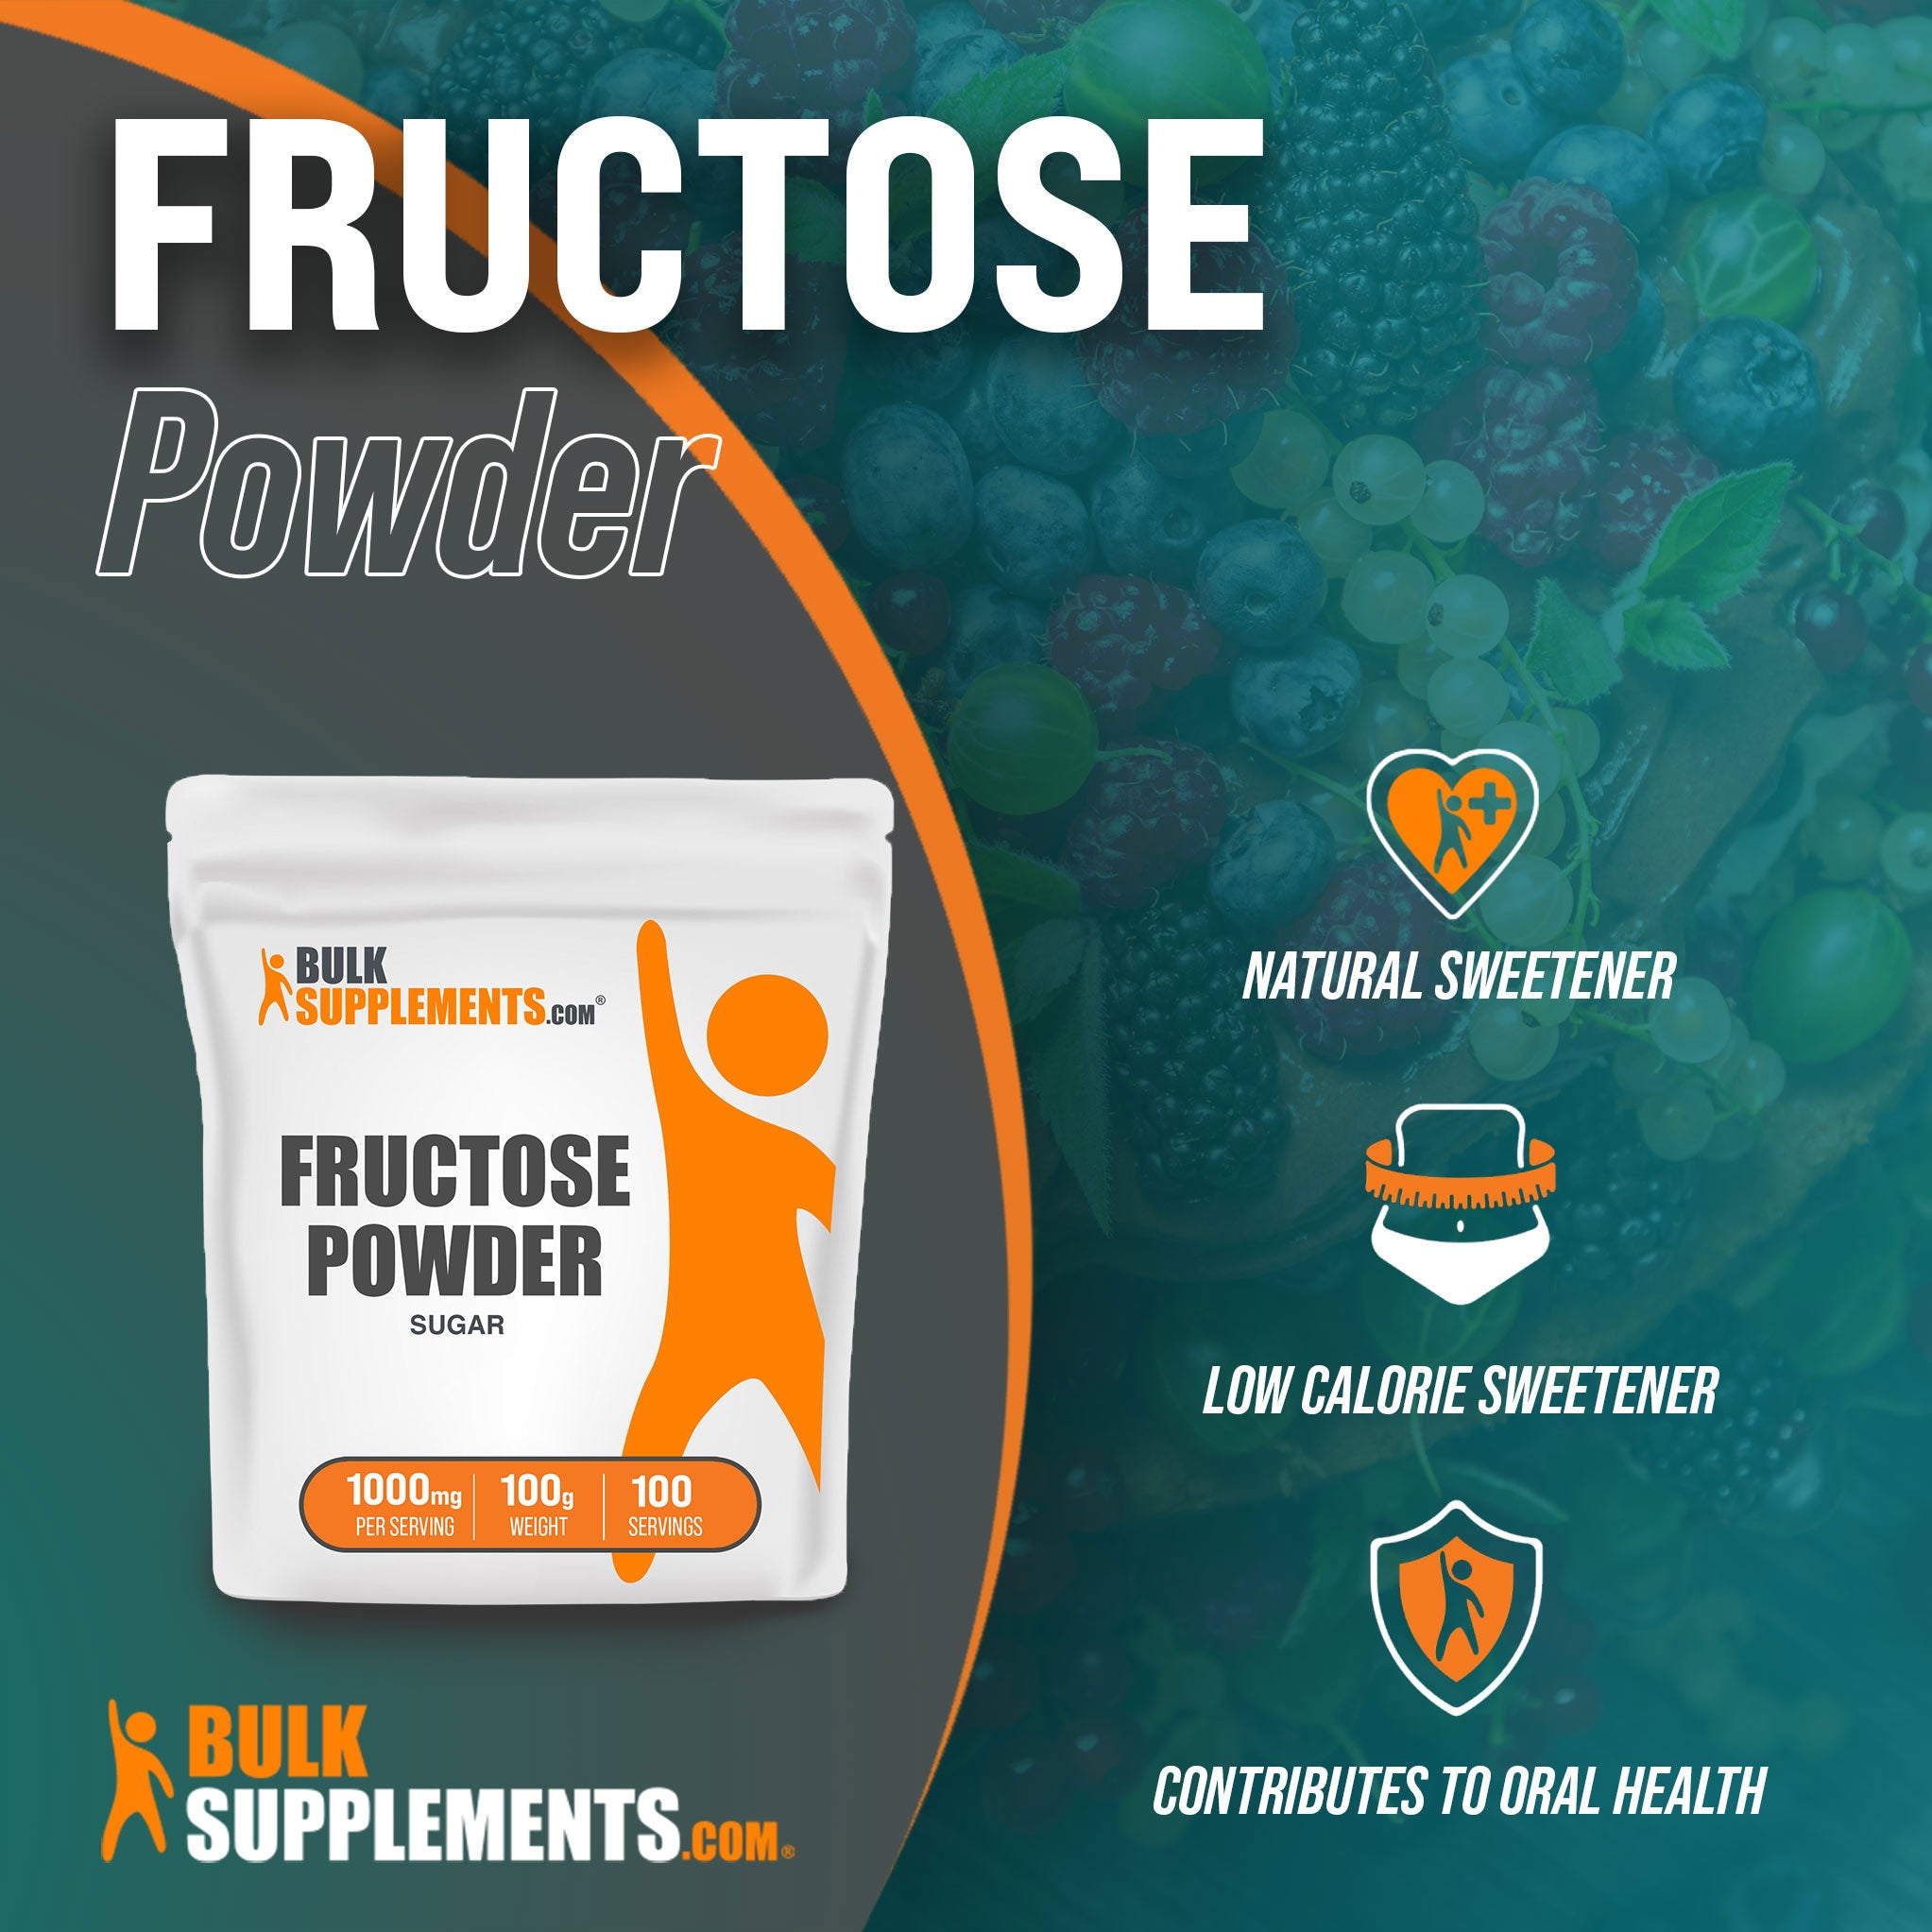 Benefits of Fructose; natural sweetener, low calorie sweetener, contributes to oral health